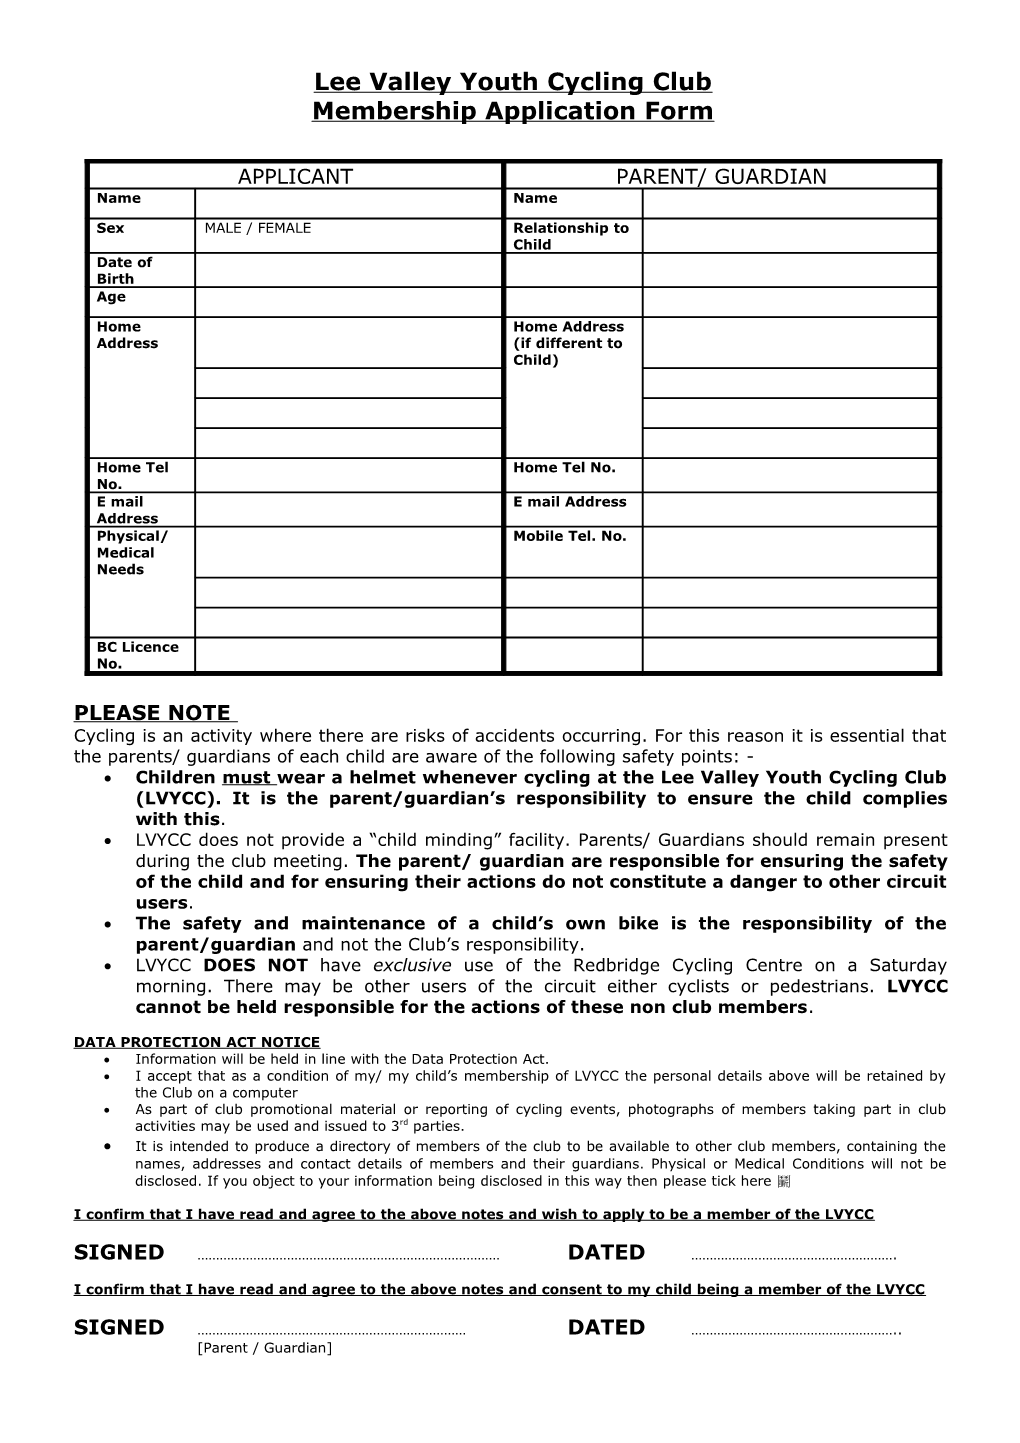 Lee Valley Youth Cycling Club Membership Application Form